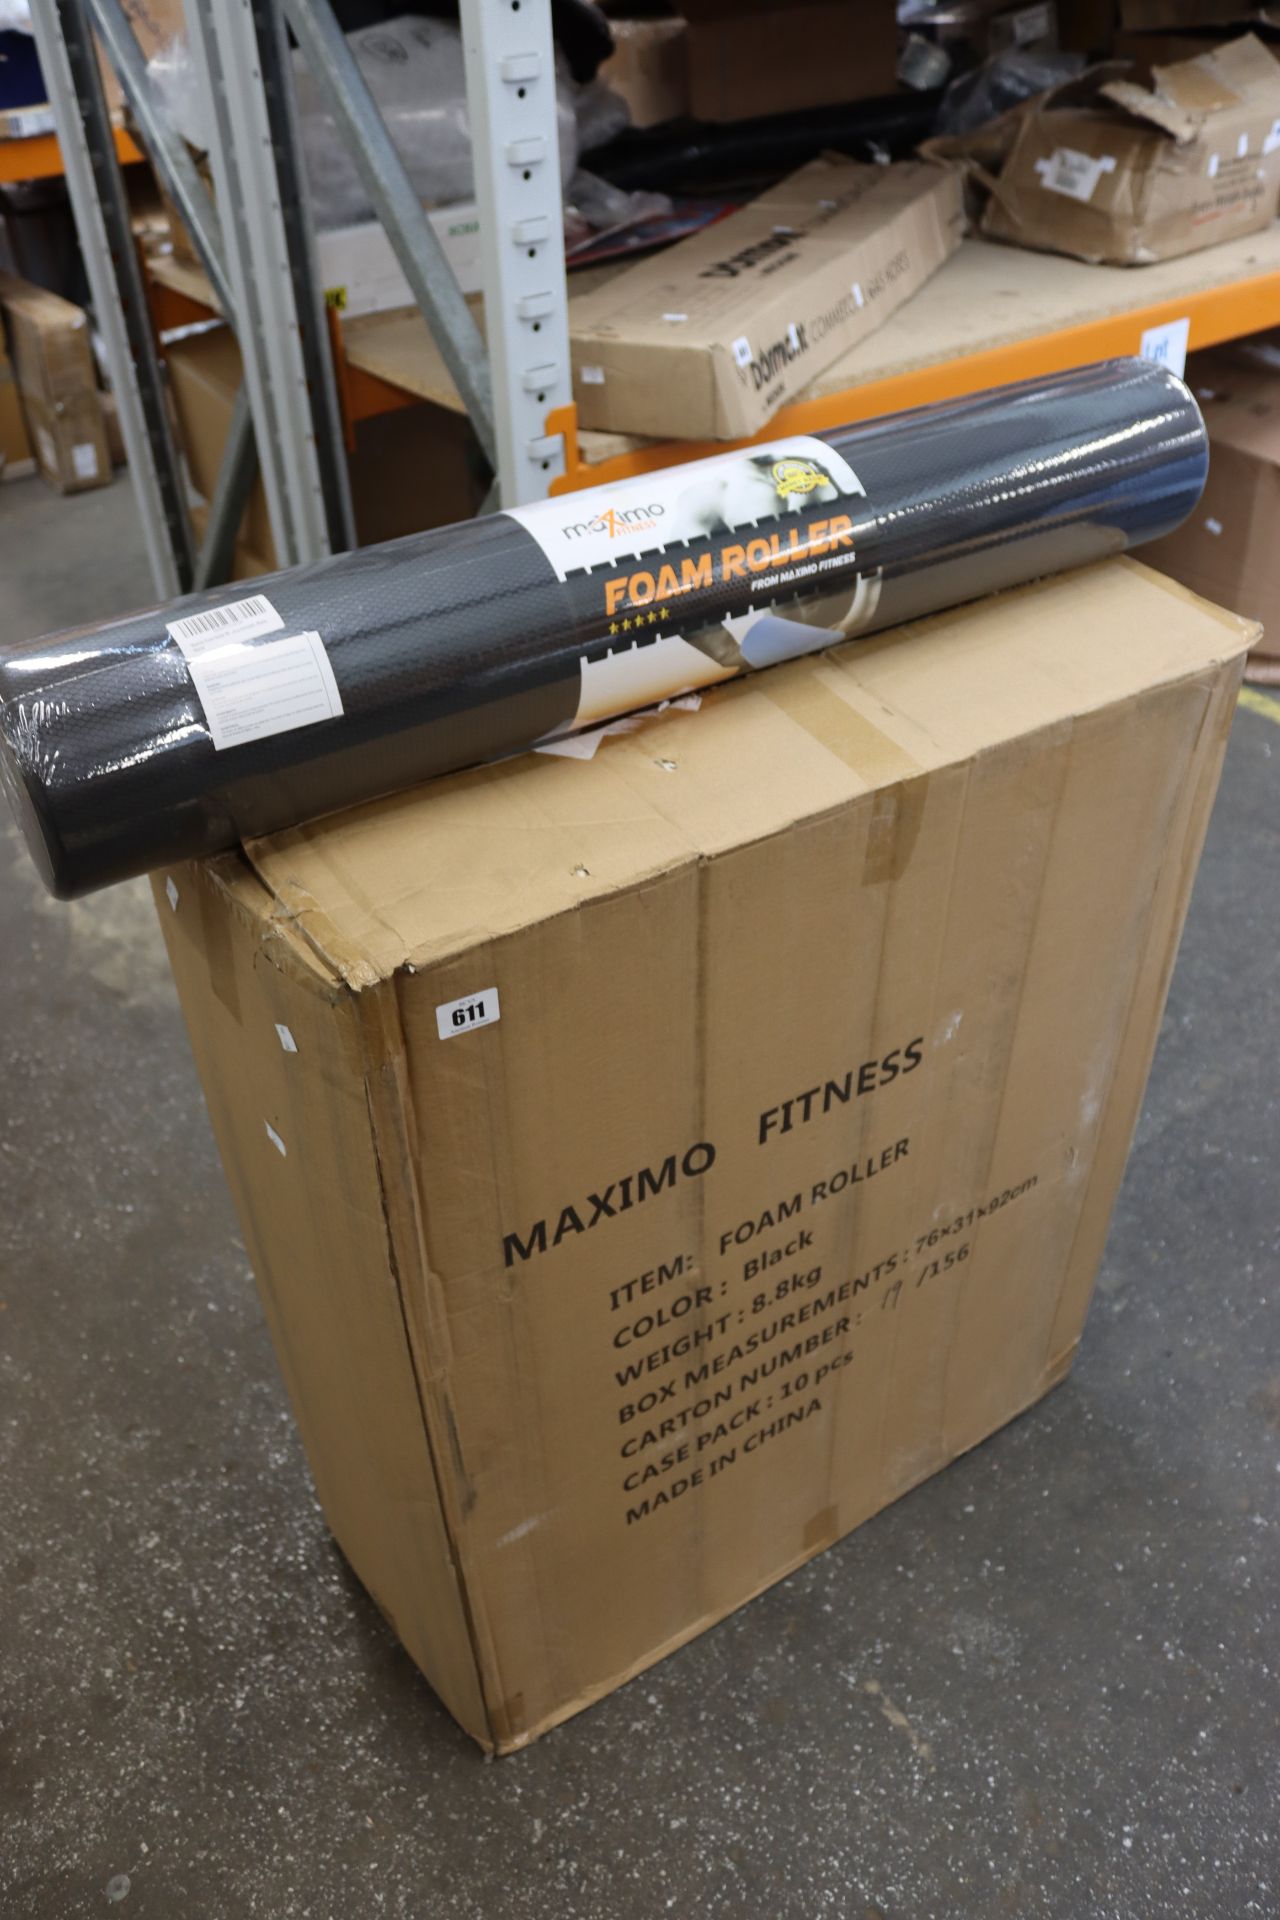 Ten as new Maximo Fitness extra long foam rollers.